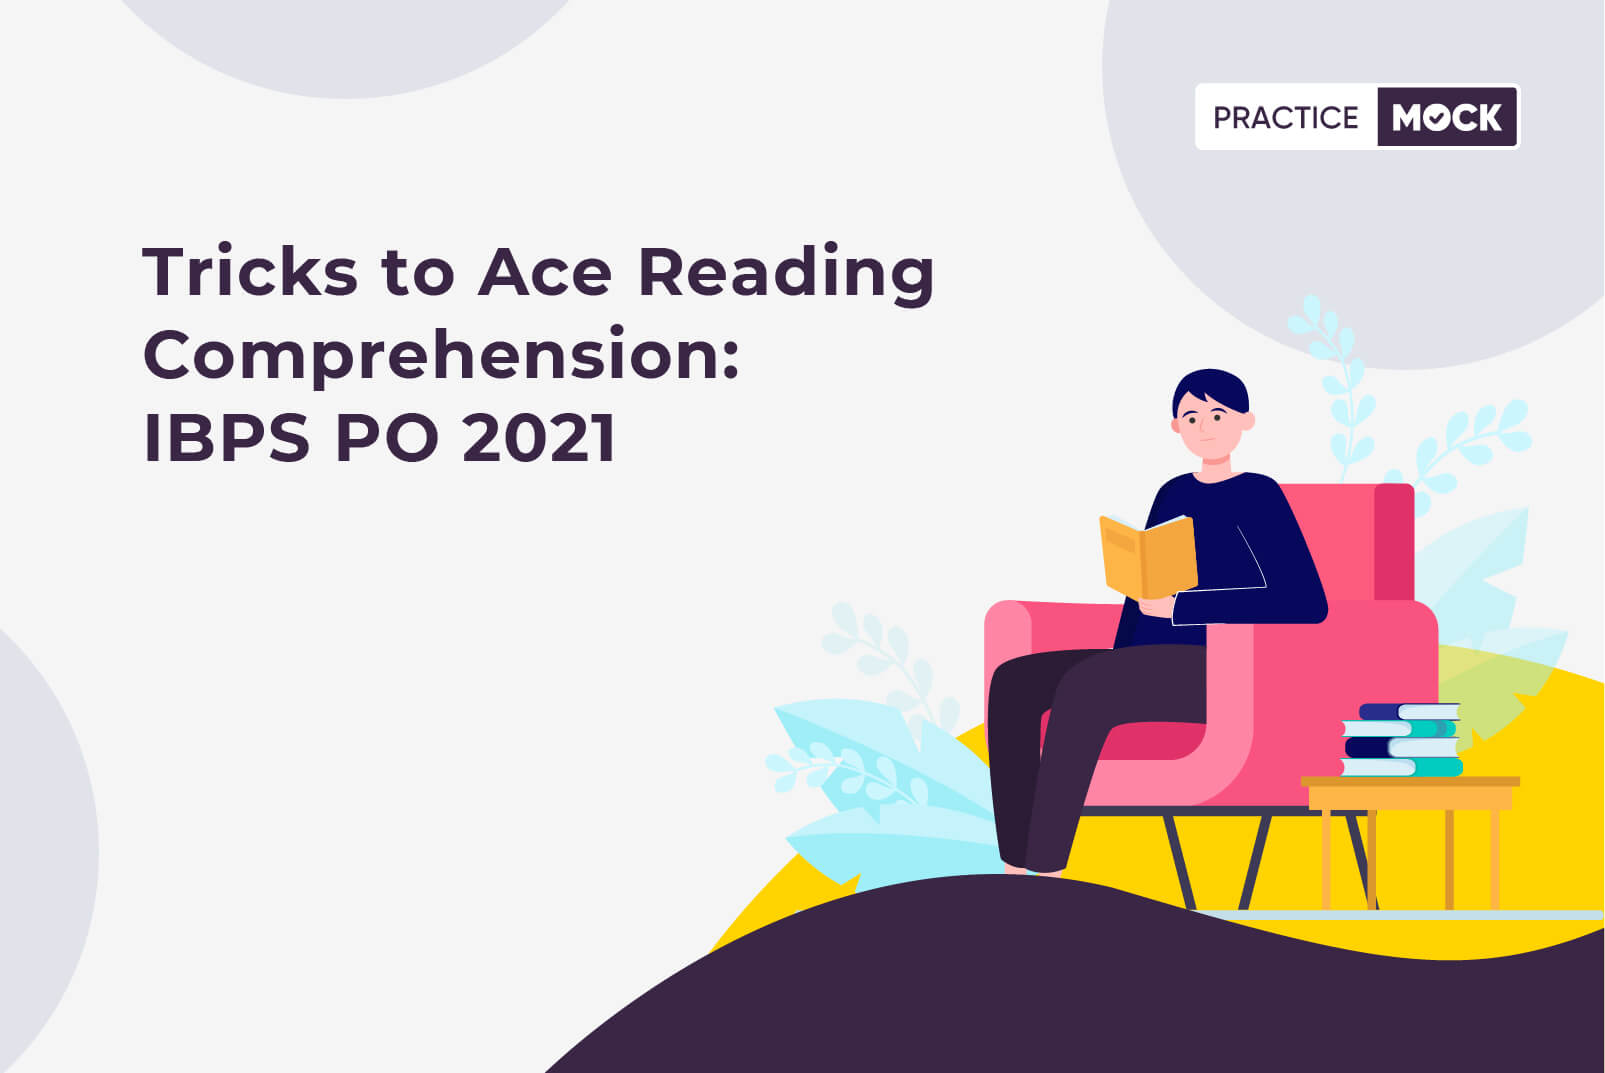 Tricks to Ace Reading Comprehension- IBPS PO 2021